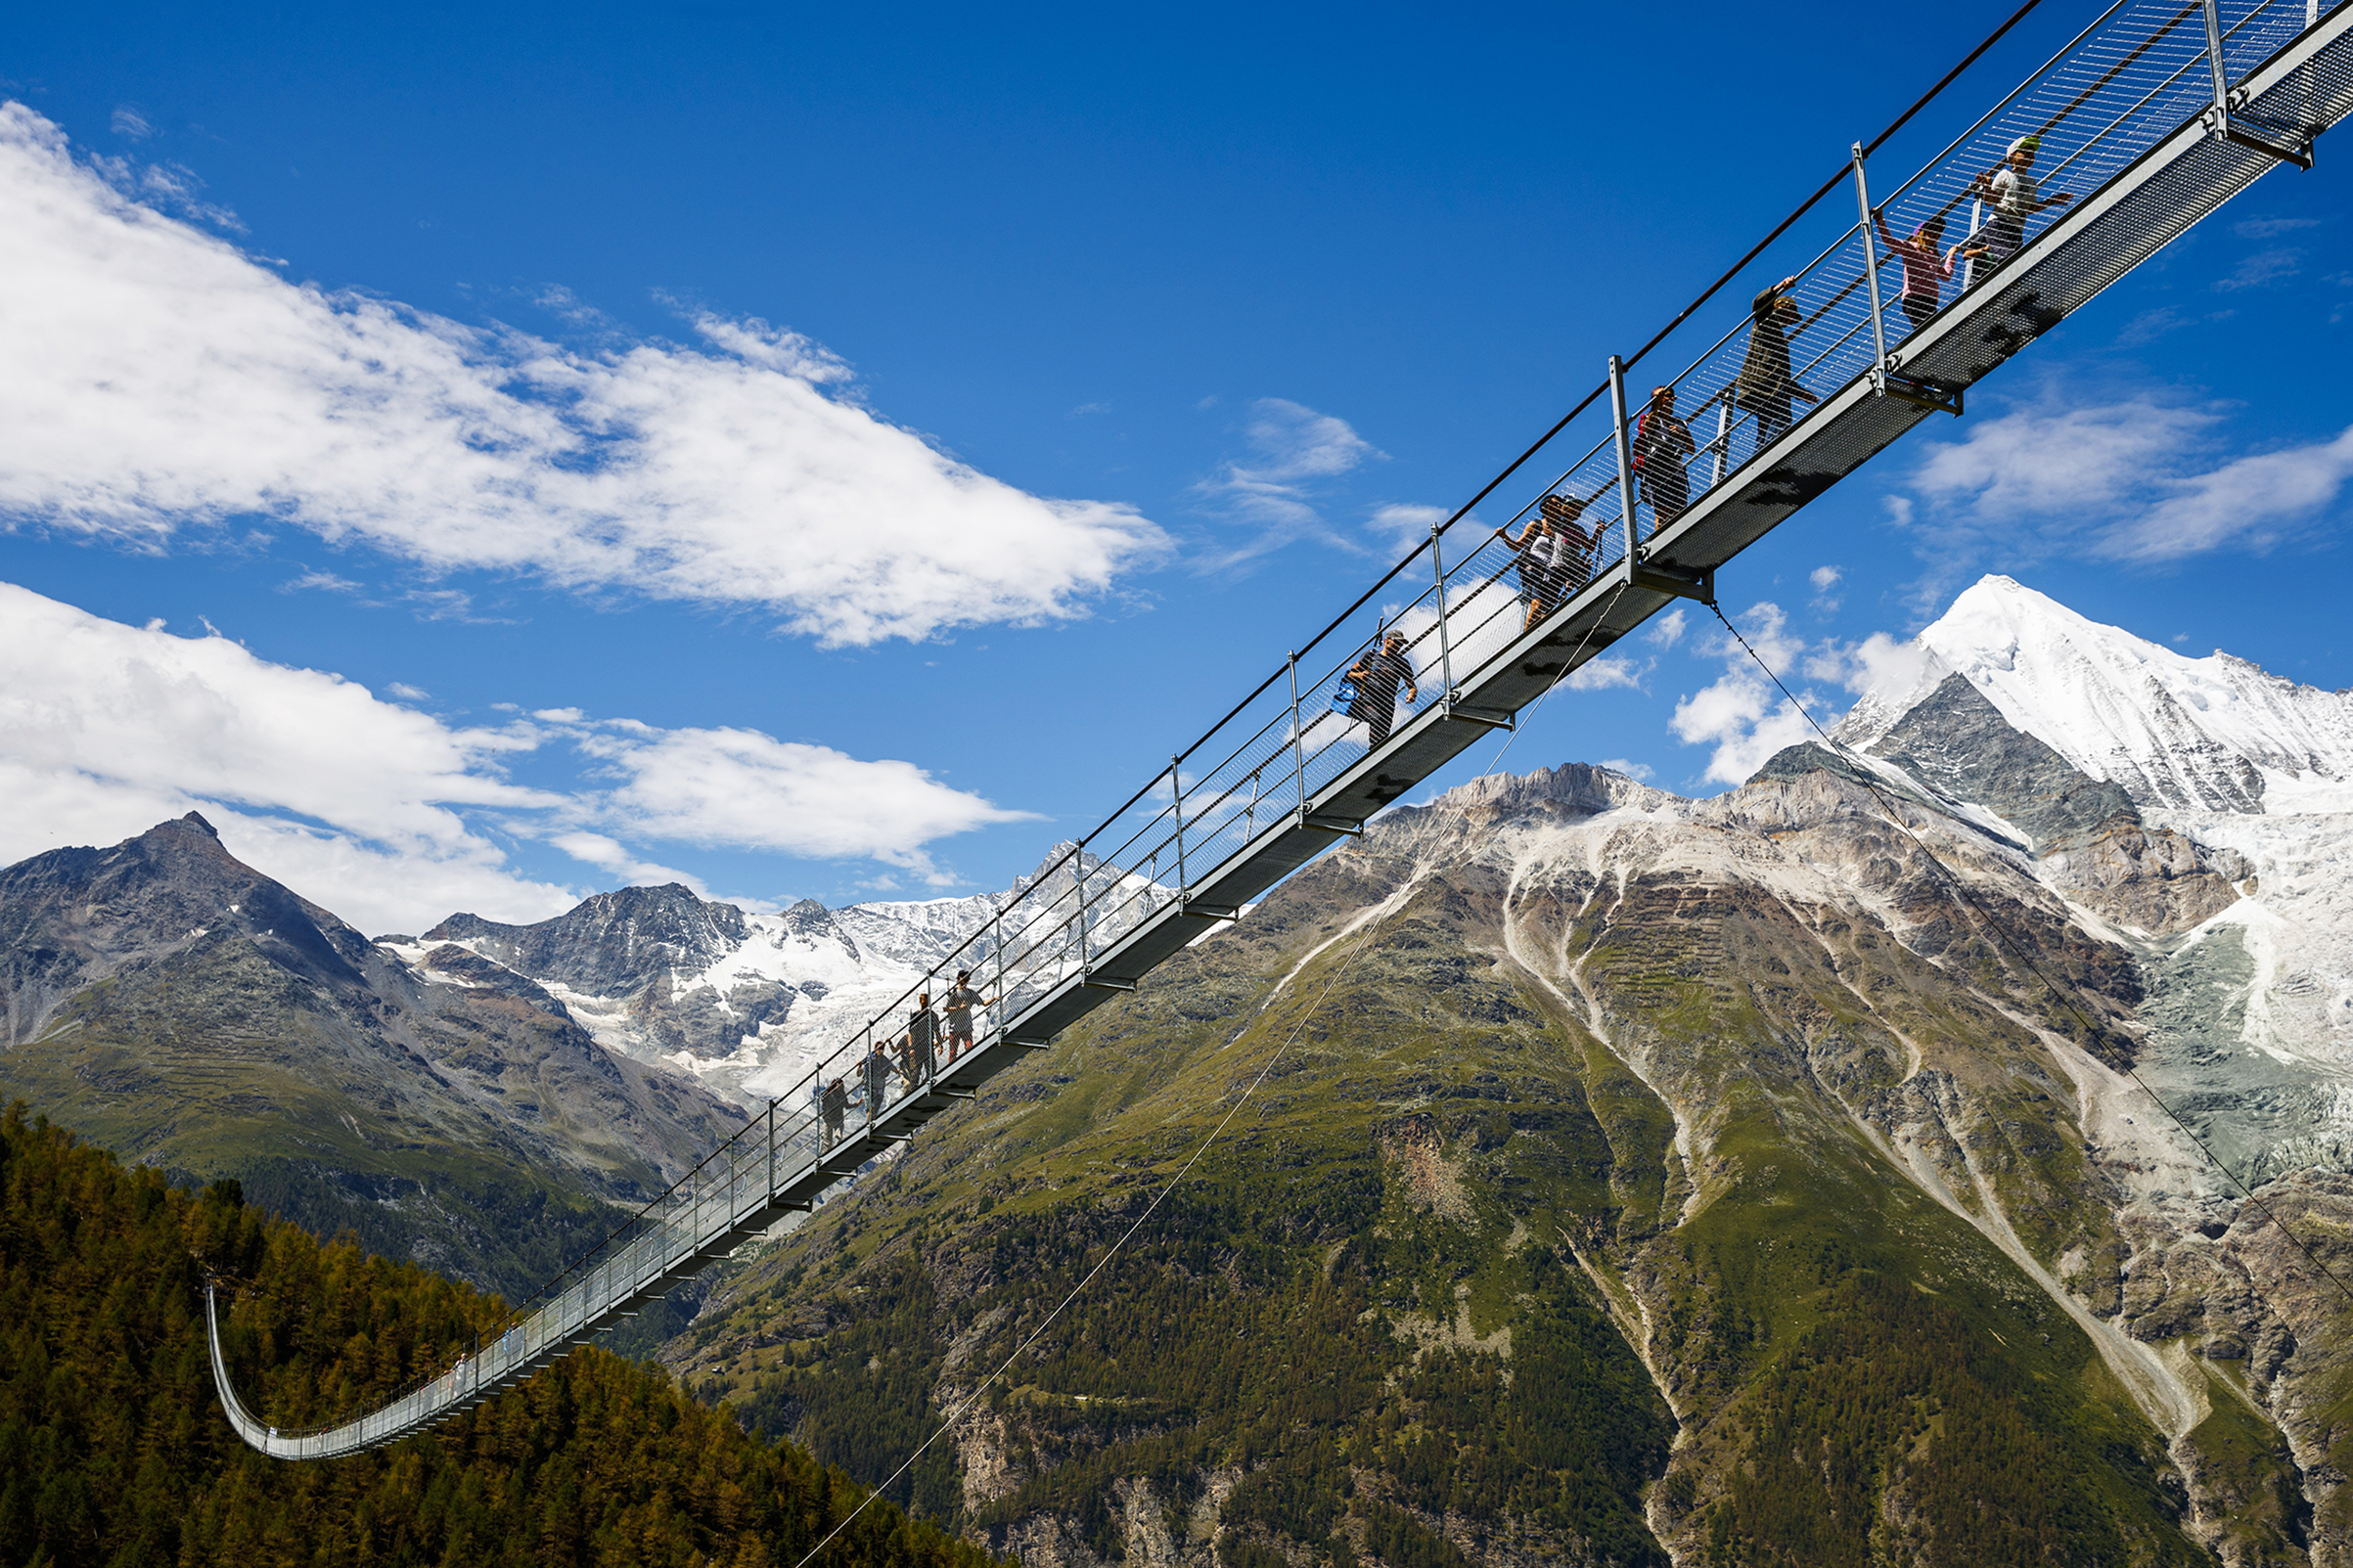 People walk on the 'The Charles Kuonen Suspension Bridge', the world's longest pedestrian suspension bridge with a length of 494m, after the official inauguration of the construction in Randa, Switzerland, July 29, 2017. (Valentin Flauraud—EPA)